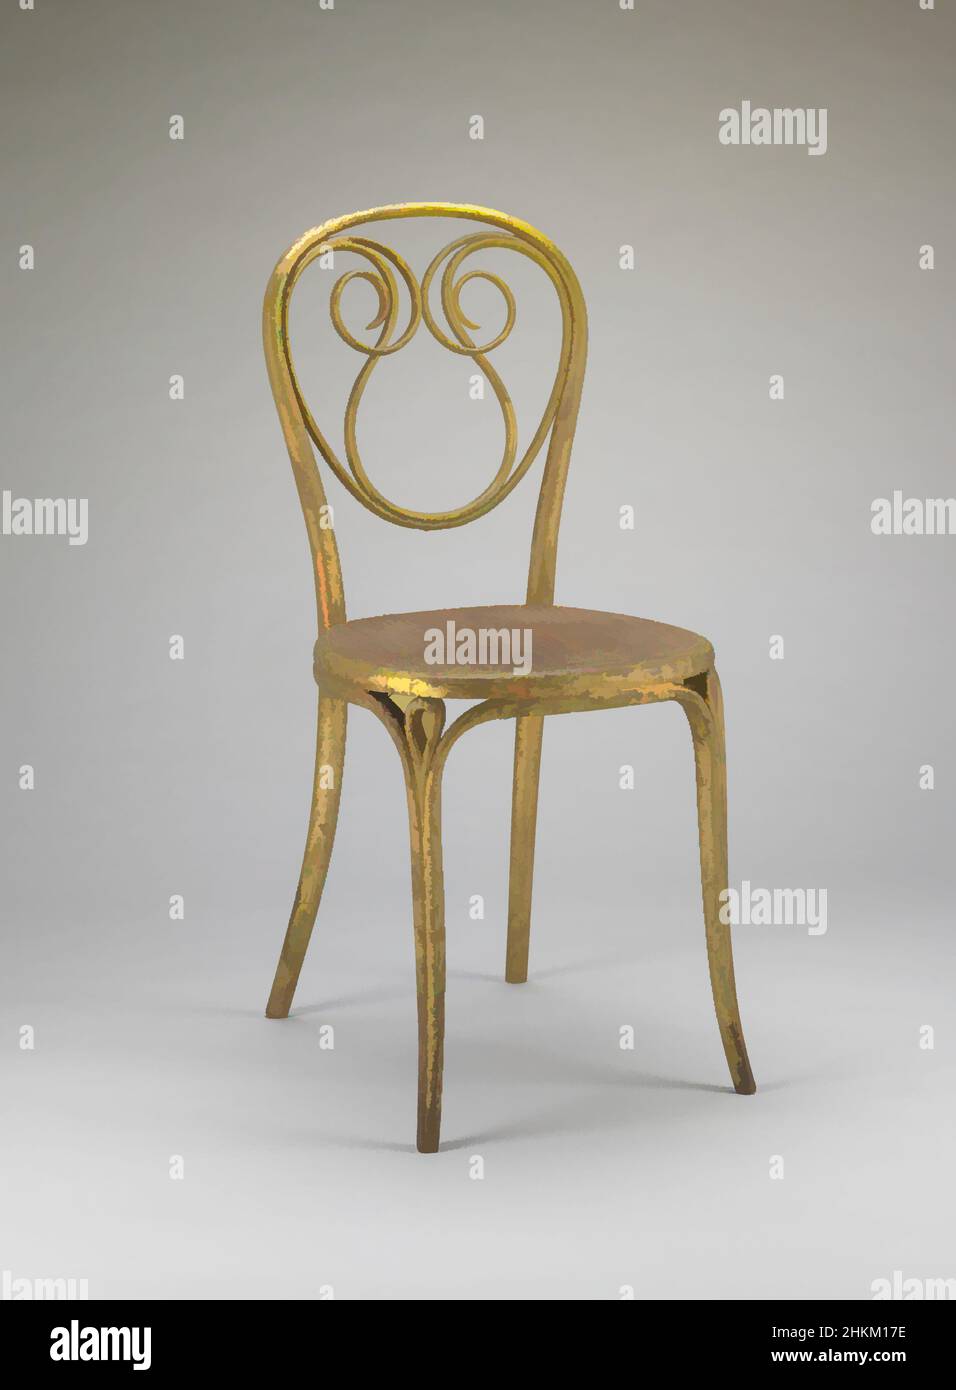 Art inspired by Chair (Model No. 13), Michael Thonet, Austrian, 1796-1871, Gebrüder Thonet, Austria, founded 1853, 1861-62, Gilded beech with cane, Made in Vienna, Austria, Europe, Furniture, Gallery 122, 37 1/4 x 16 1/2 x 19 1/4 in. (94.6 x 41.9 x 48.9 cm, Classic works modernized by Artotop with a splash of modernity. Shapes, color and value, eye-catching visual impact on art. Emotions through freedom of artworks in a contemporary way. A timeless message pursuing a wildly creative new direction. Artists turning to the digital medium and creating the Artotop NFT Stock Photo